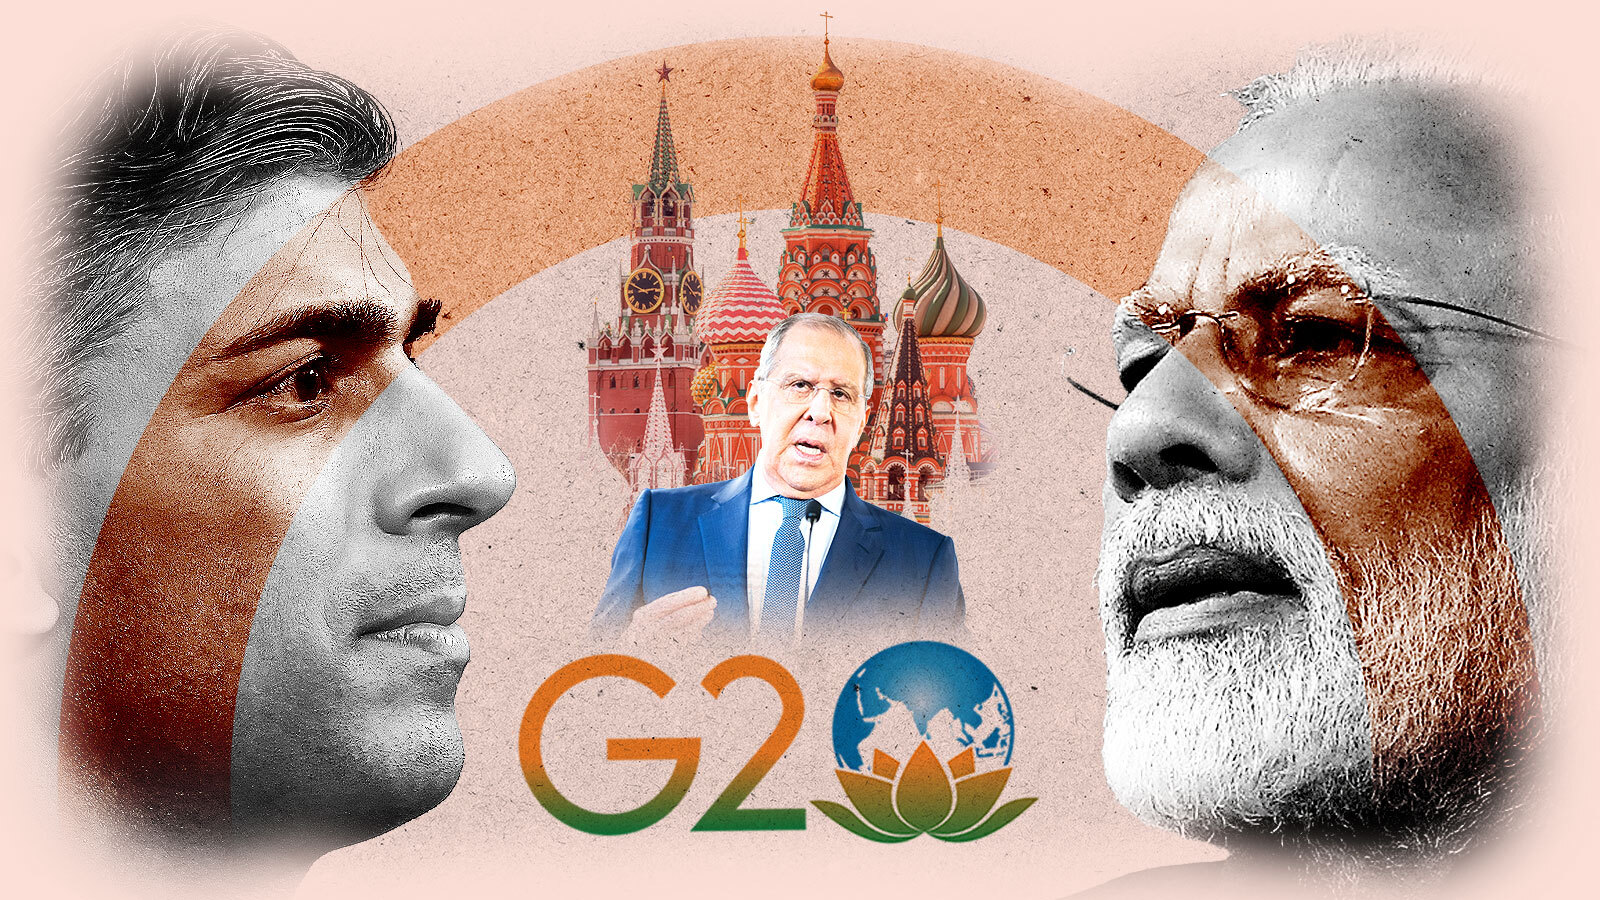 The conclusions of the G20 summit - where will the new arena of the G20 be?